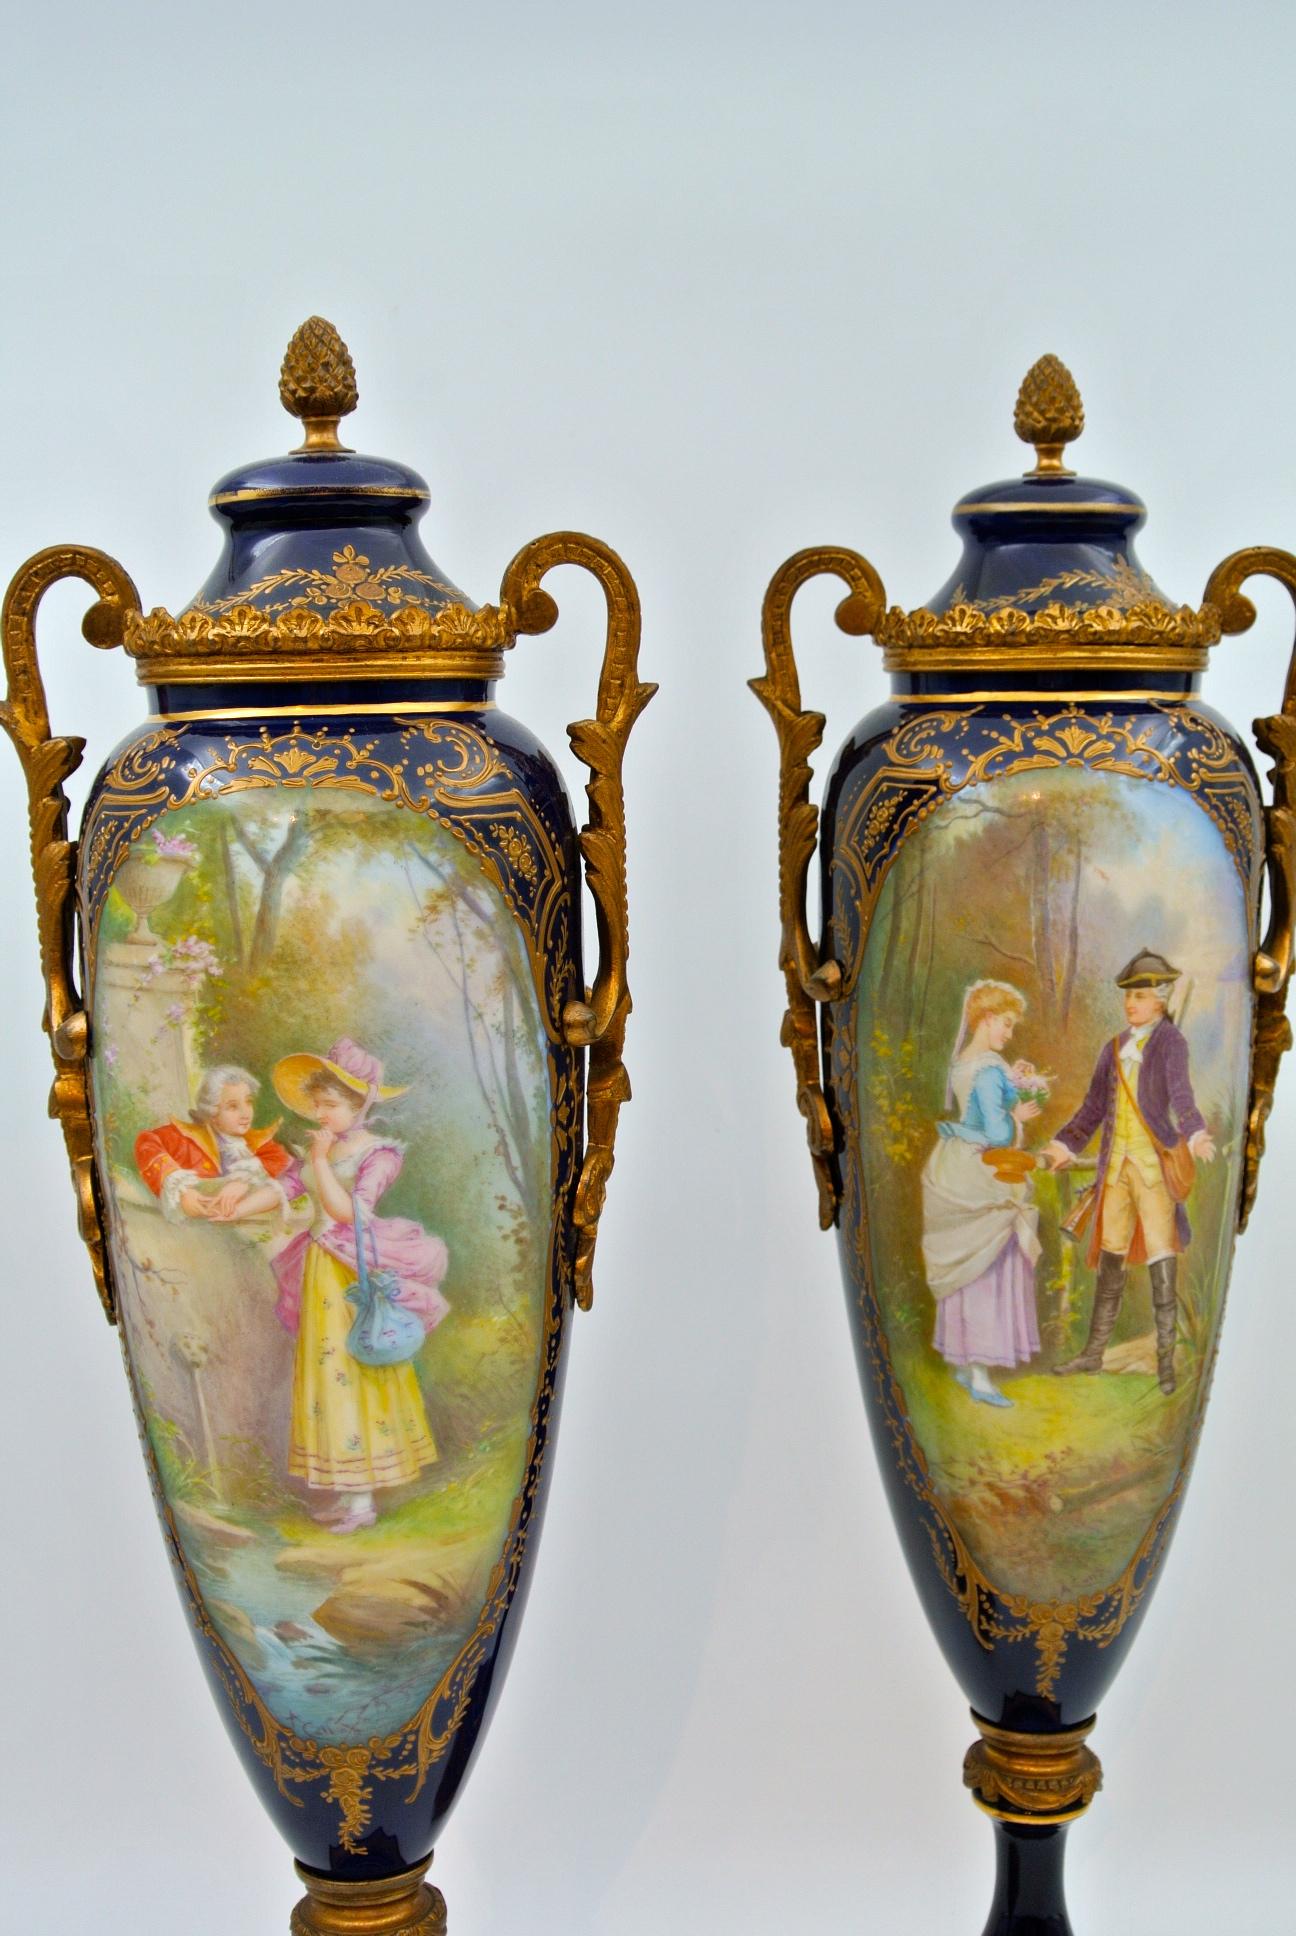 Pair of covered vases in Sèvres Porcelain and gilt bronze, Napoleon III period, 19th century.
Measures: H 50 cm, W 16 cm, D 13 cm.